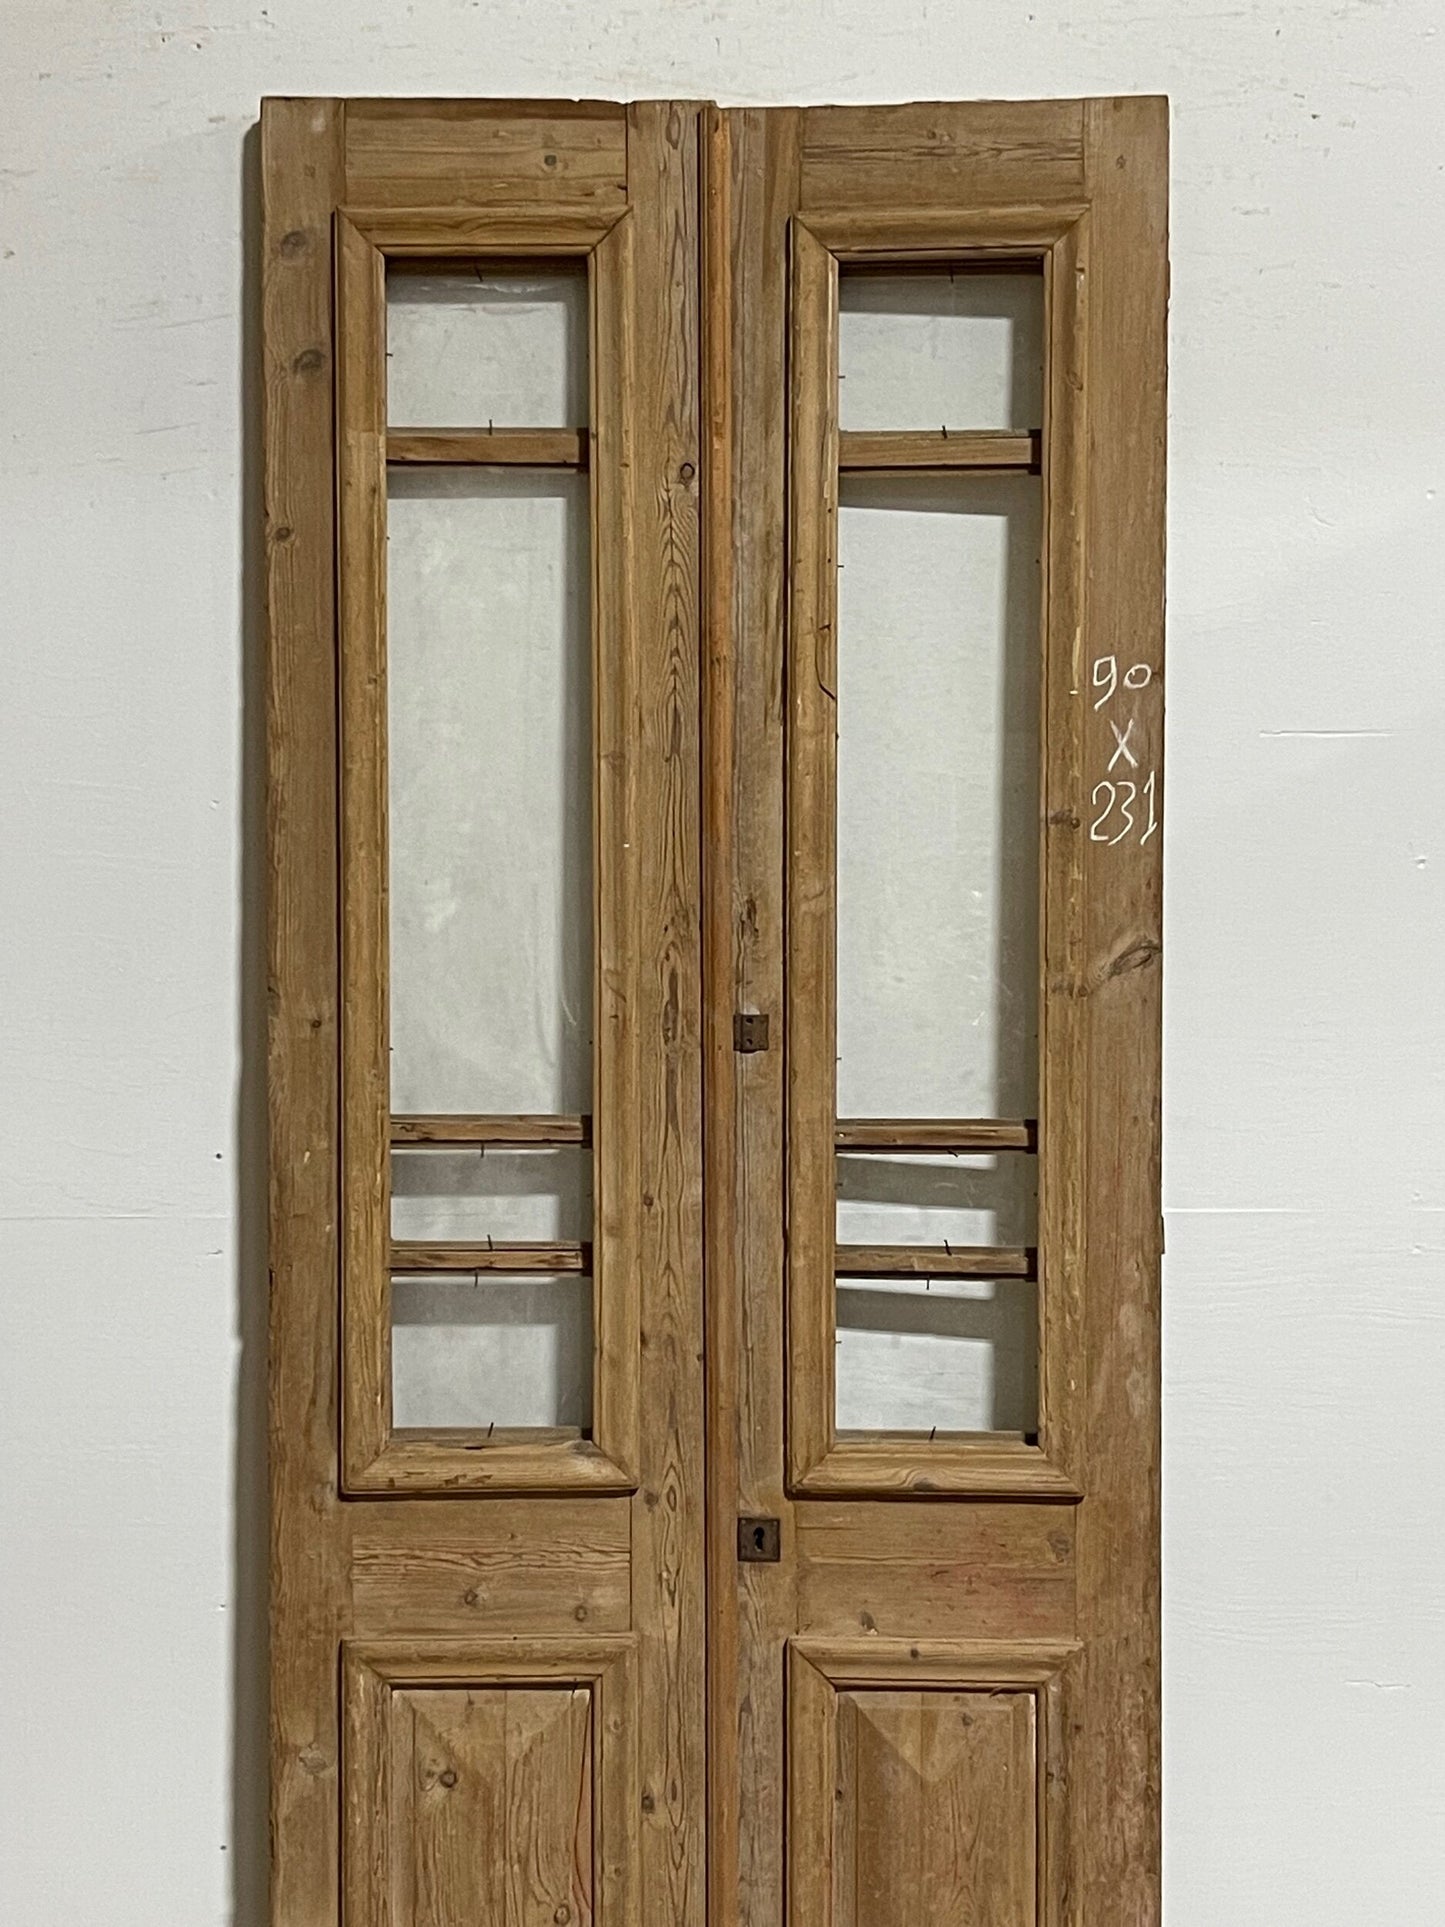 Antique French doors with glass (91.5x35) H0101s